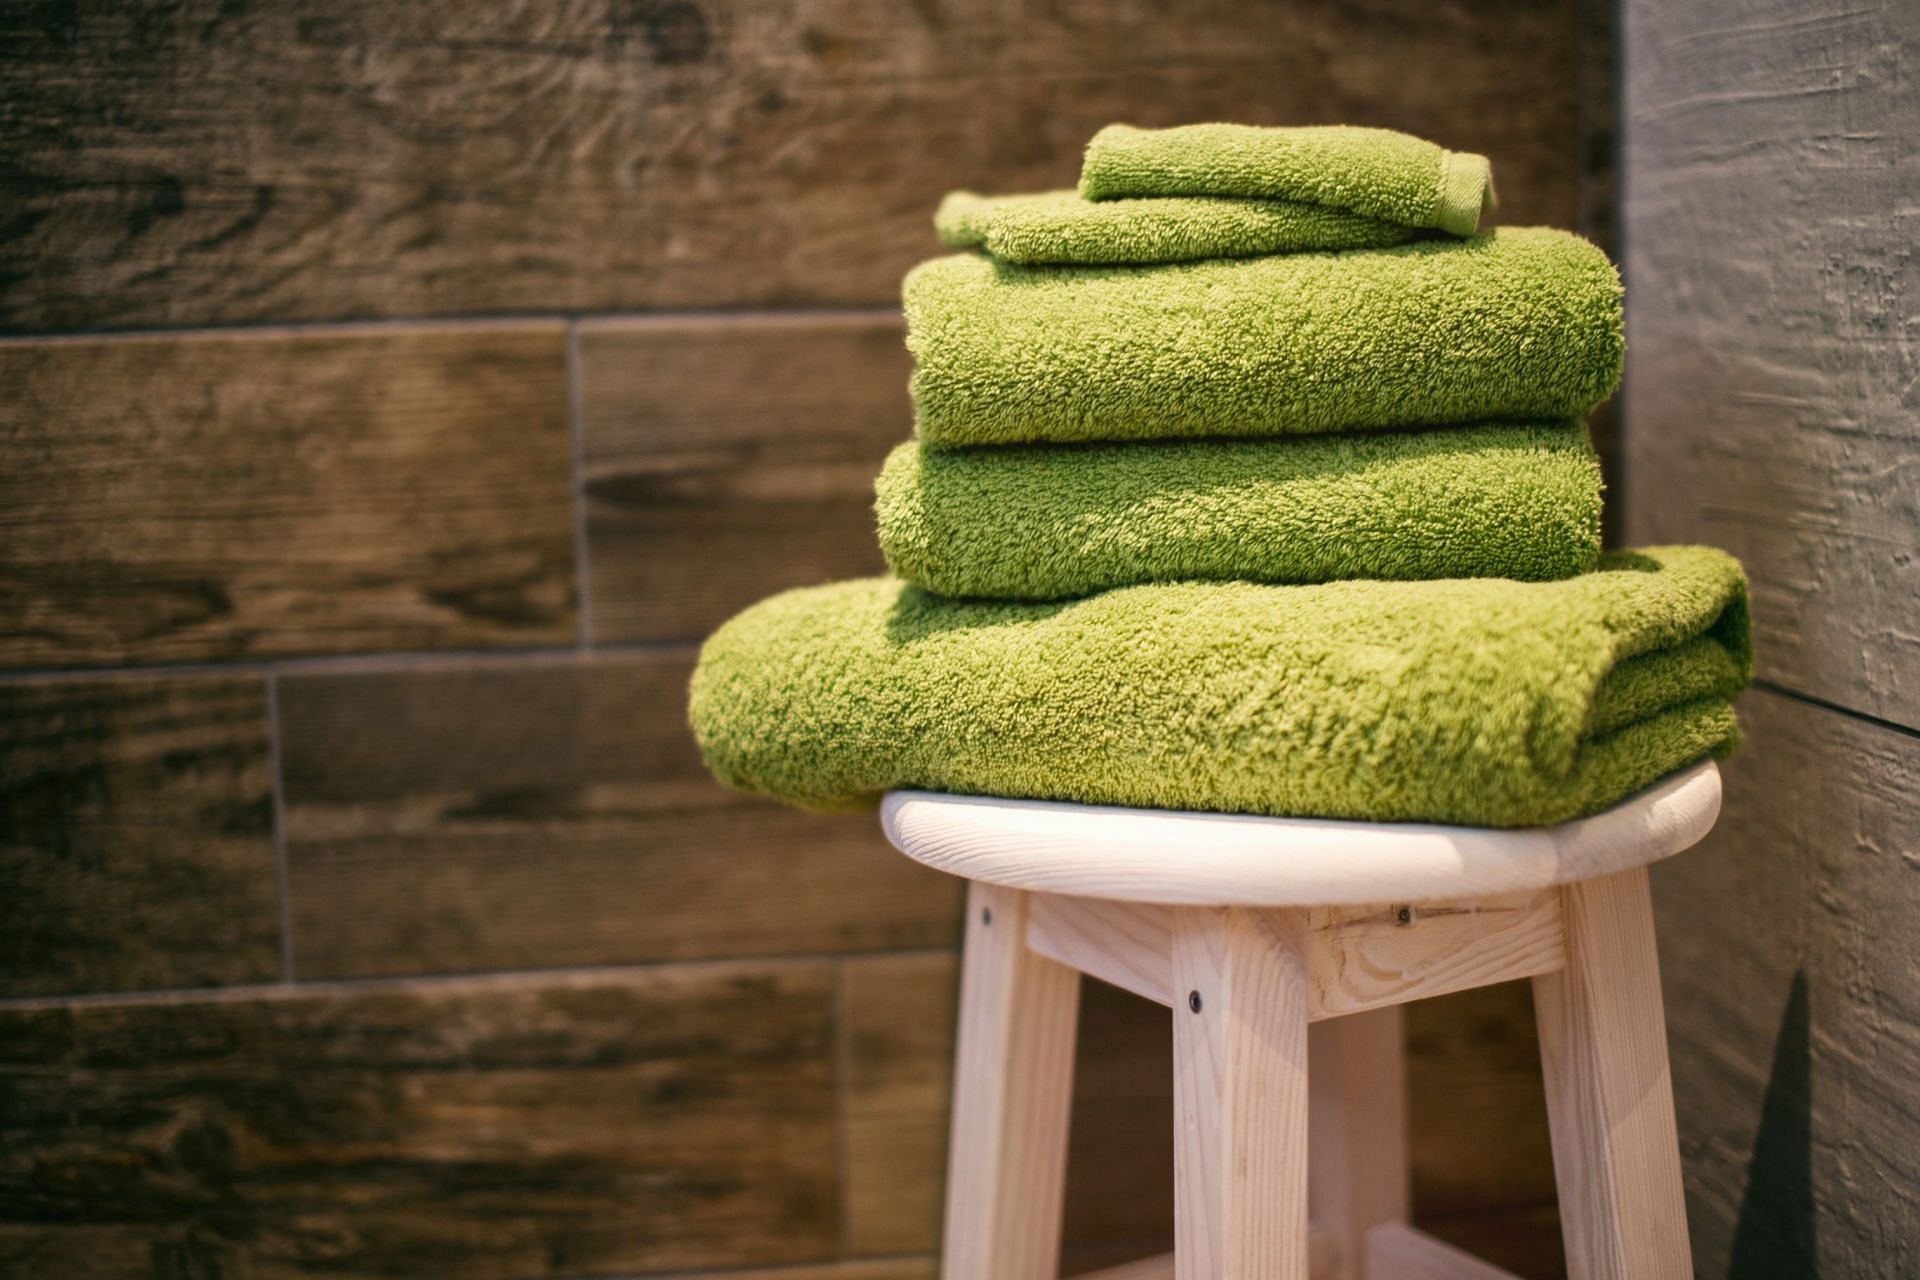 This technique of using a towel can reduce belly fats (Image via Unsplash/ Denny Muller)